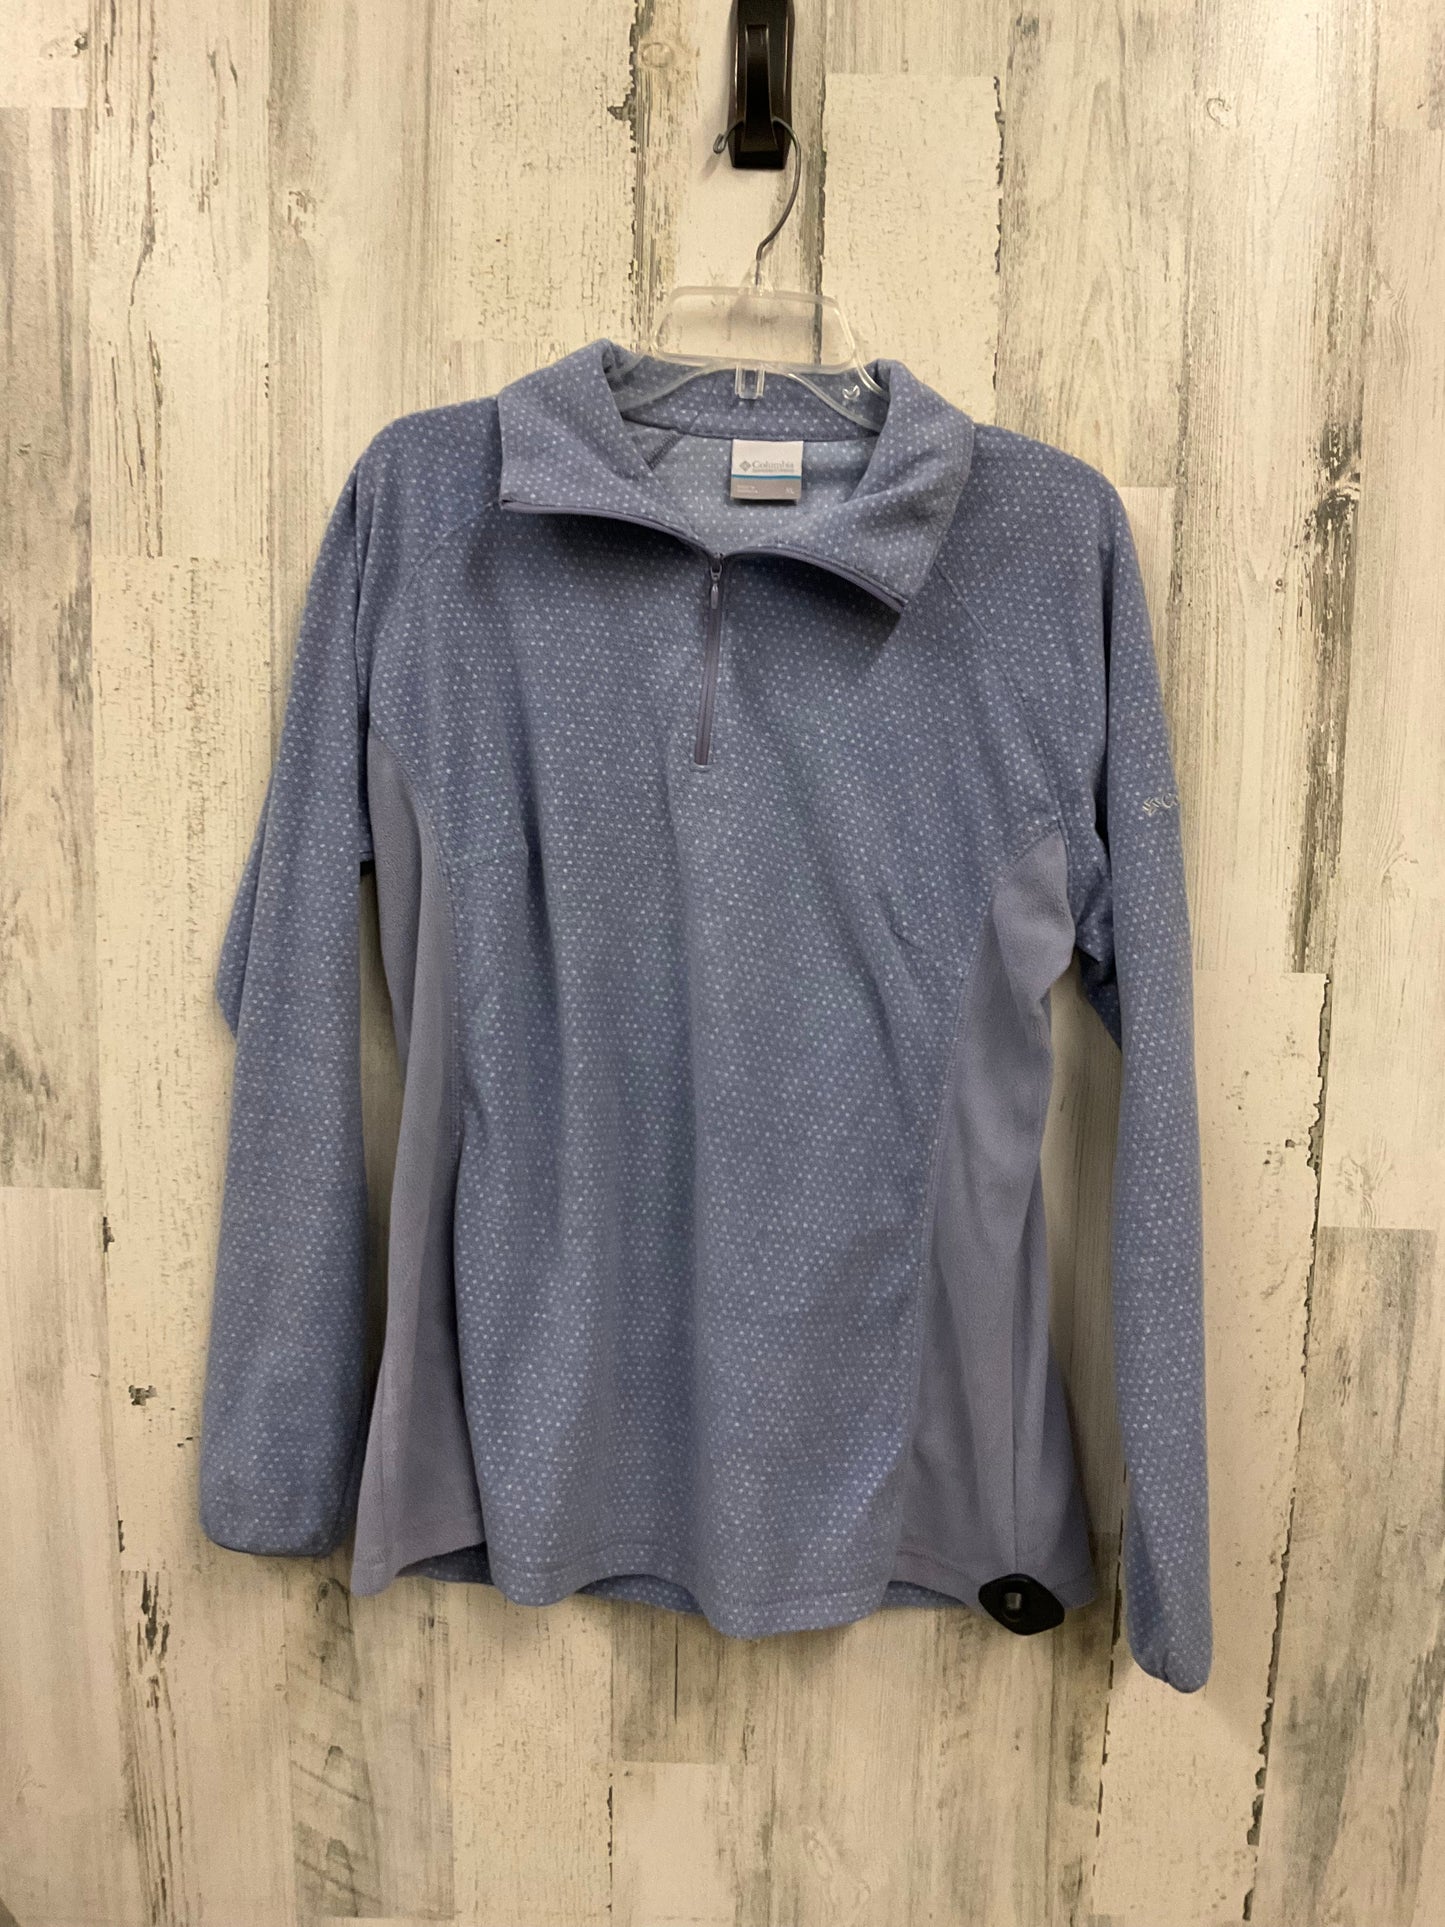 Sweater By Columbia  Size: Xl